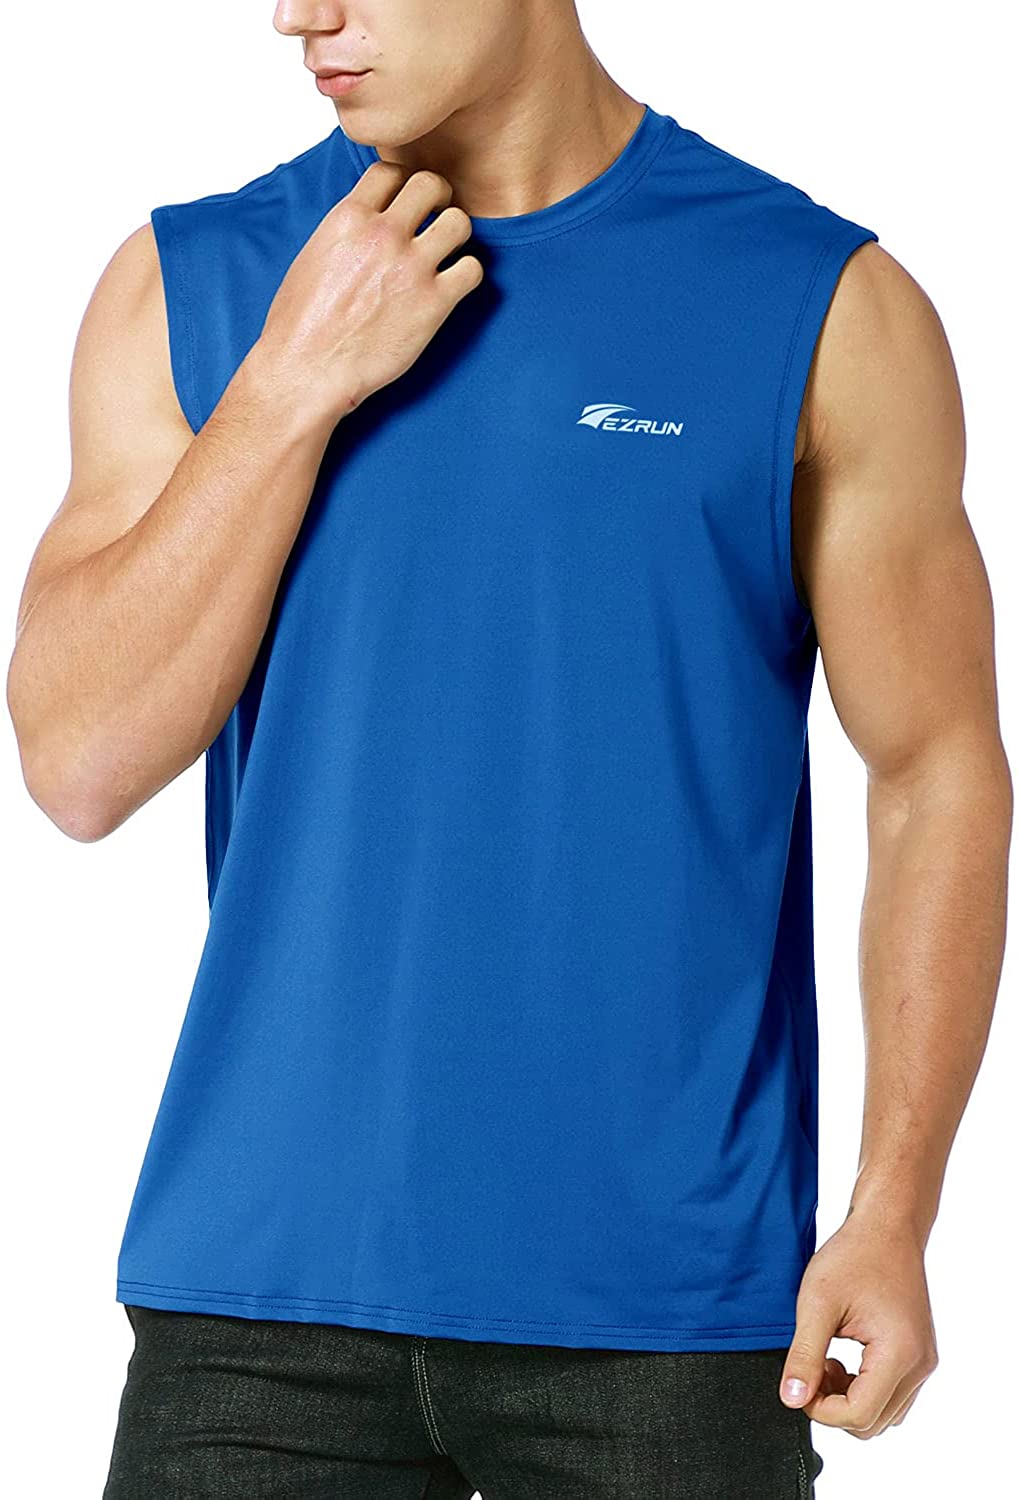 EZRUN Men's Performance Quick Dry Sleeveless Shirts Workout Muscle Bodybuil  【☆超目玉】